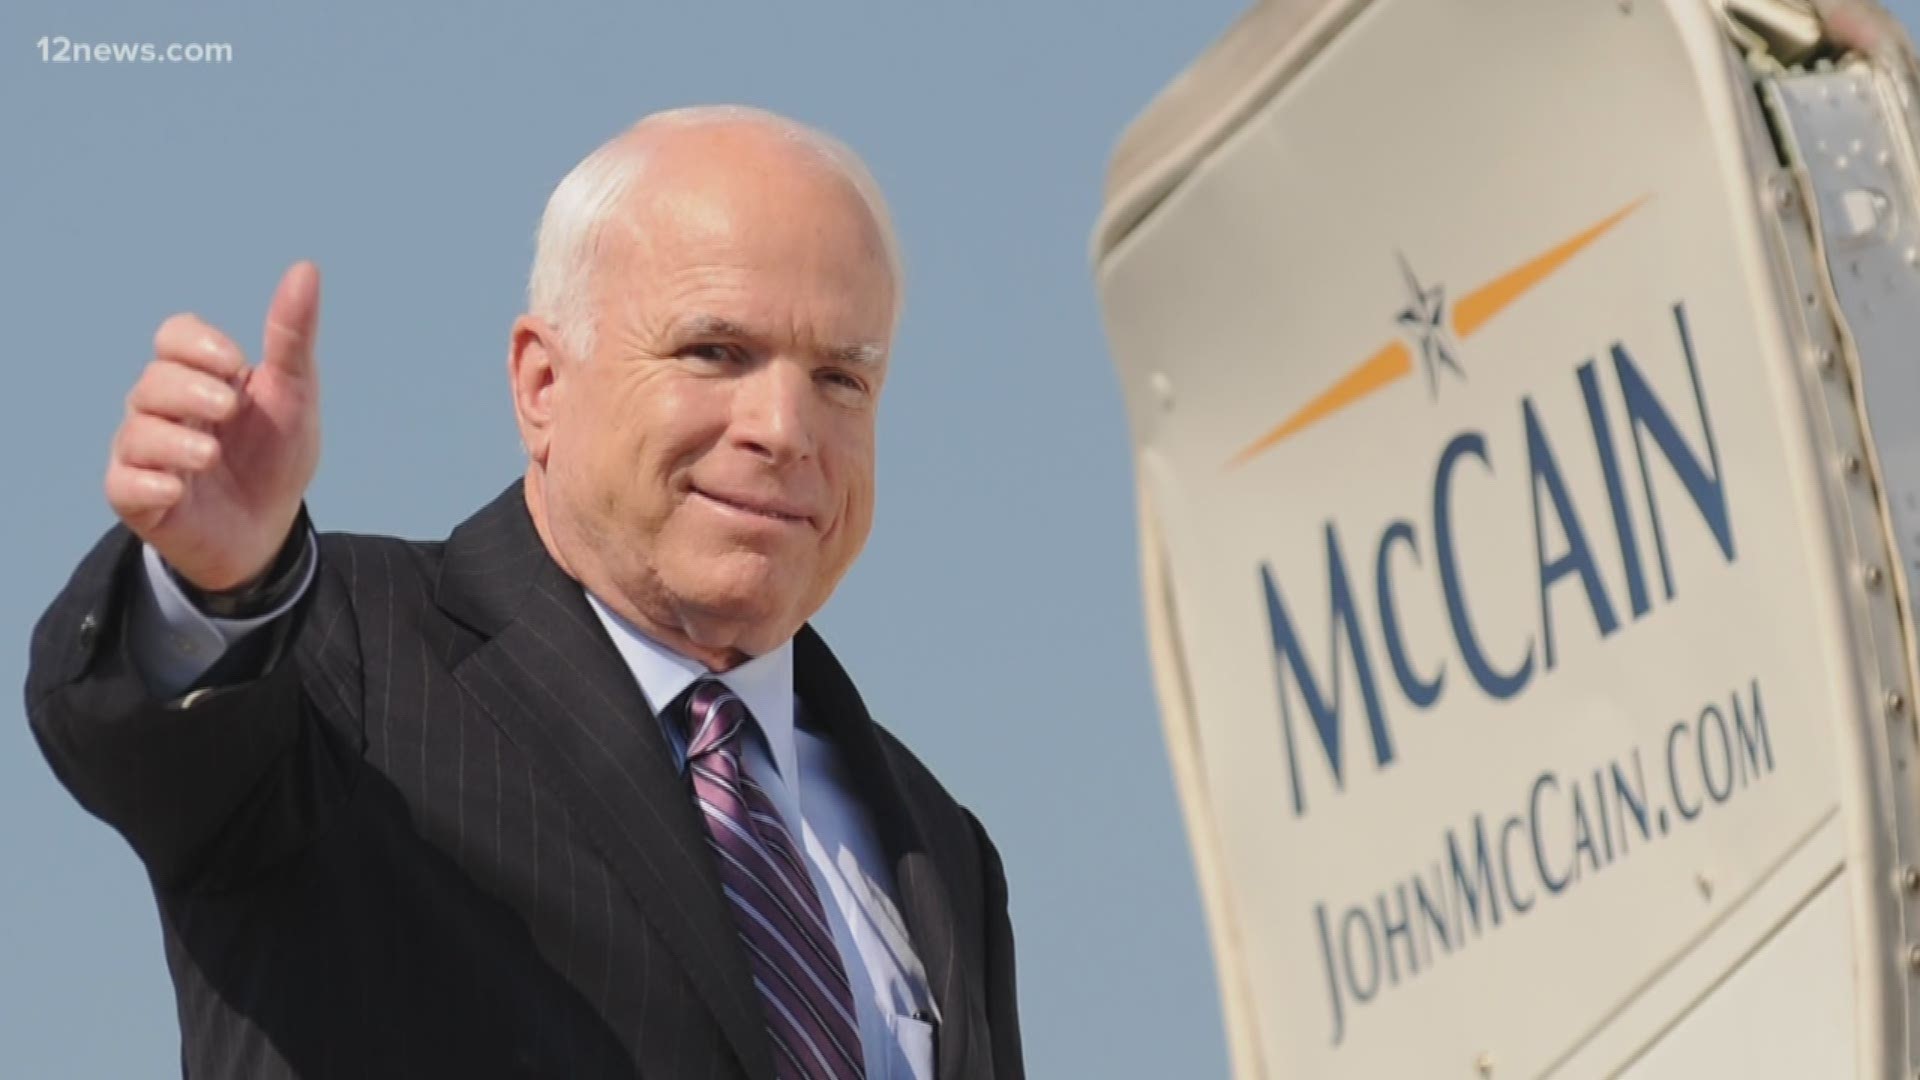 John McCain was a Senator for Arizona the whole time students at Queen Creek High School have been alive. This past week they have been learning about The Maverick and they reflect on the lessons his legacy leaves behind.